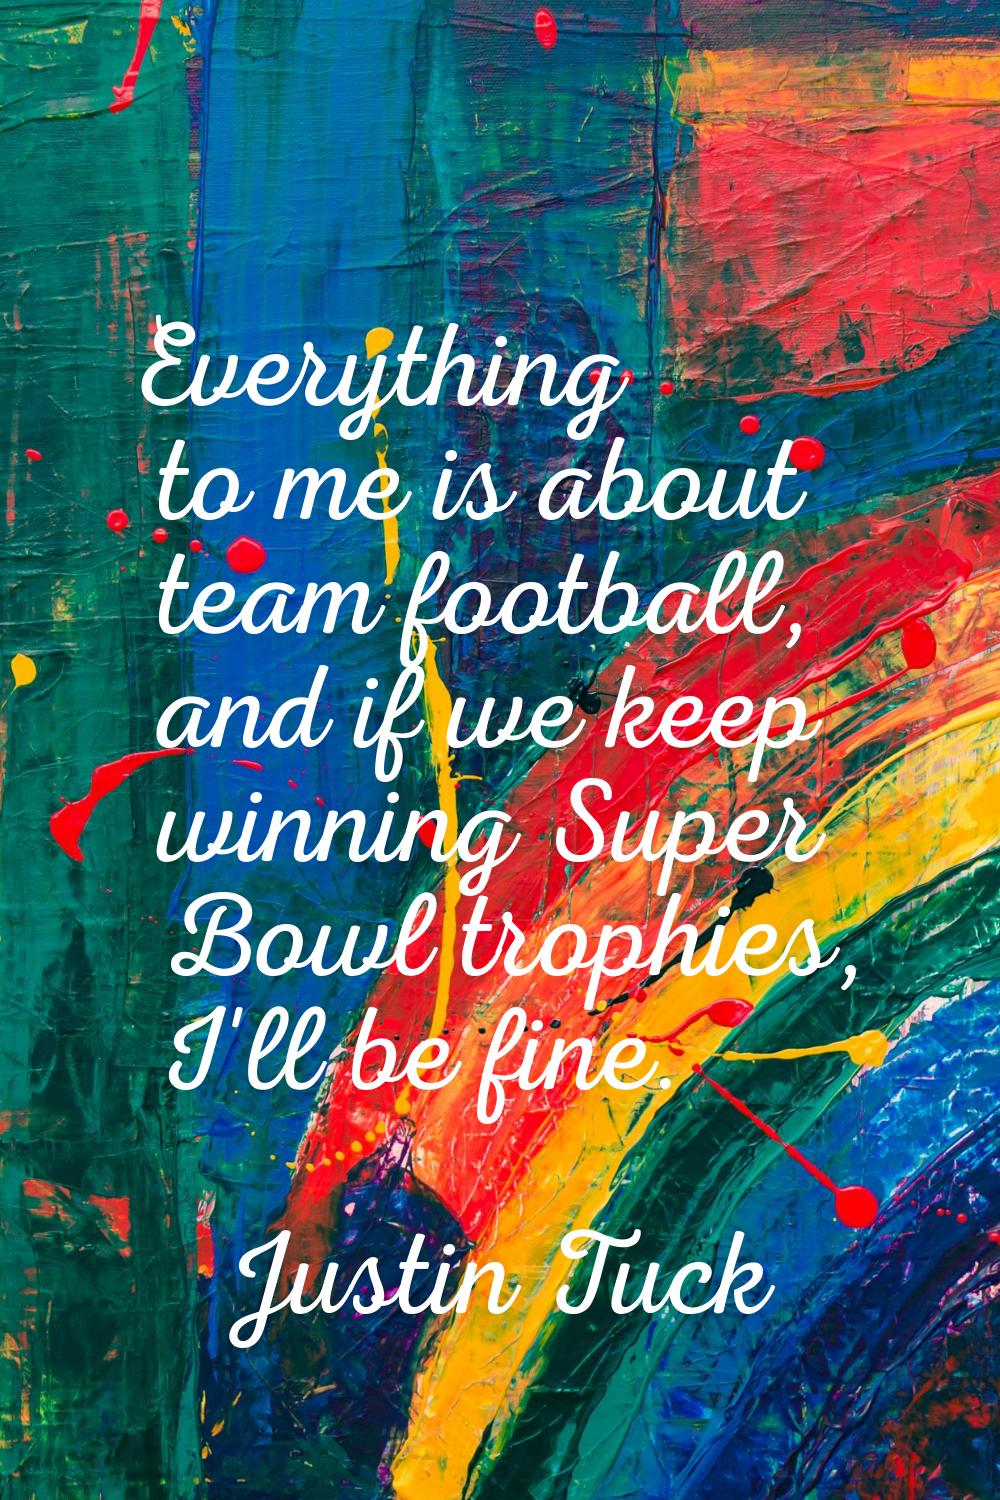 Everything to me is about team football, and if we keep winning Super Bowl trophies, I'll be fine.